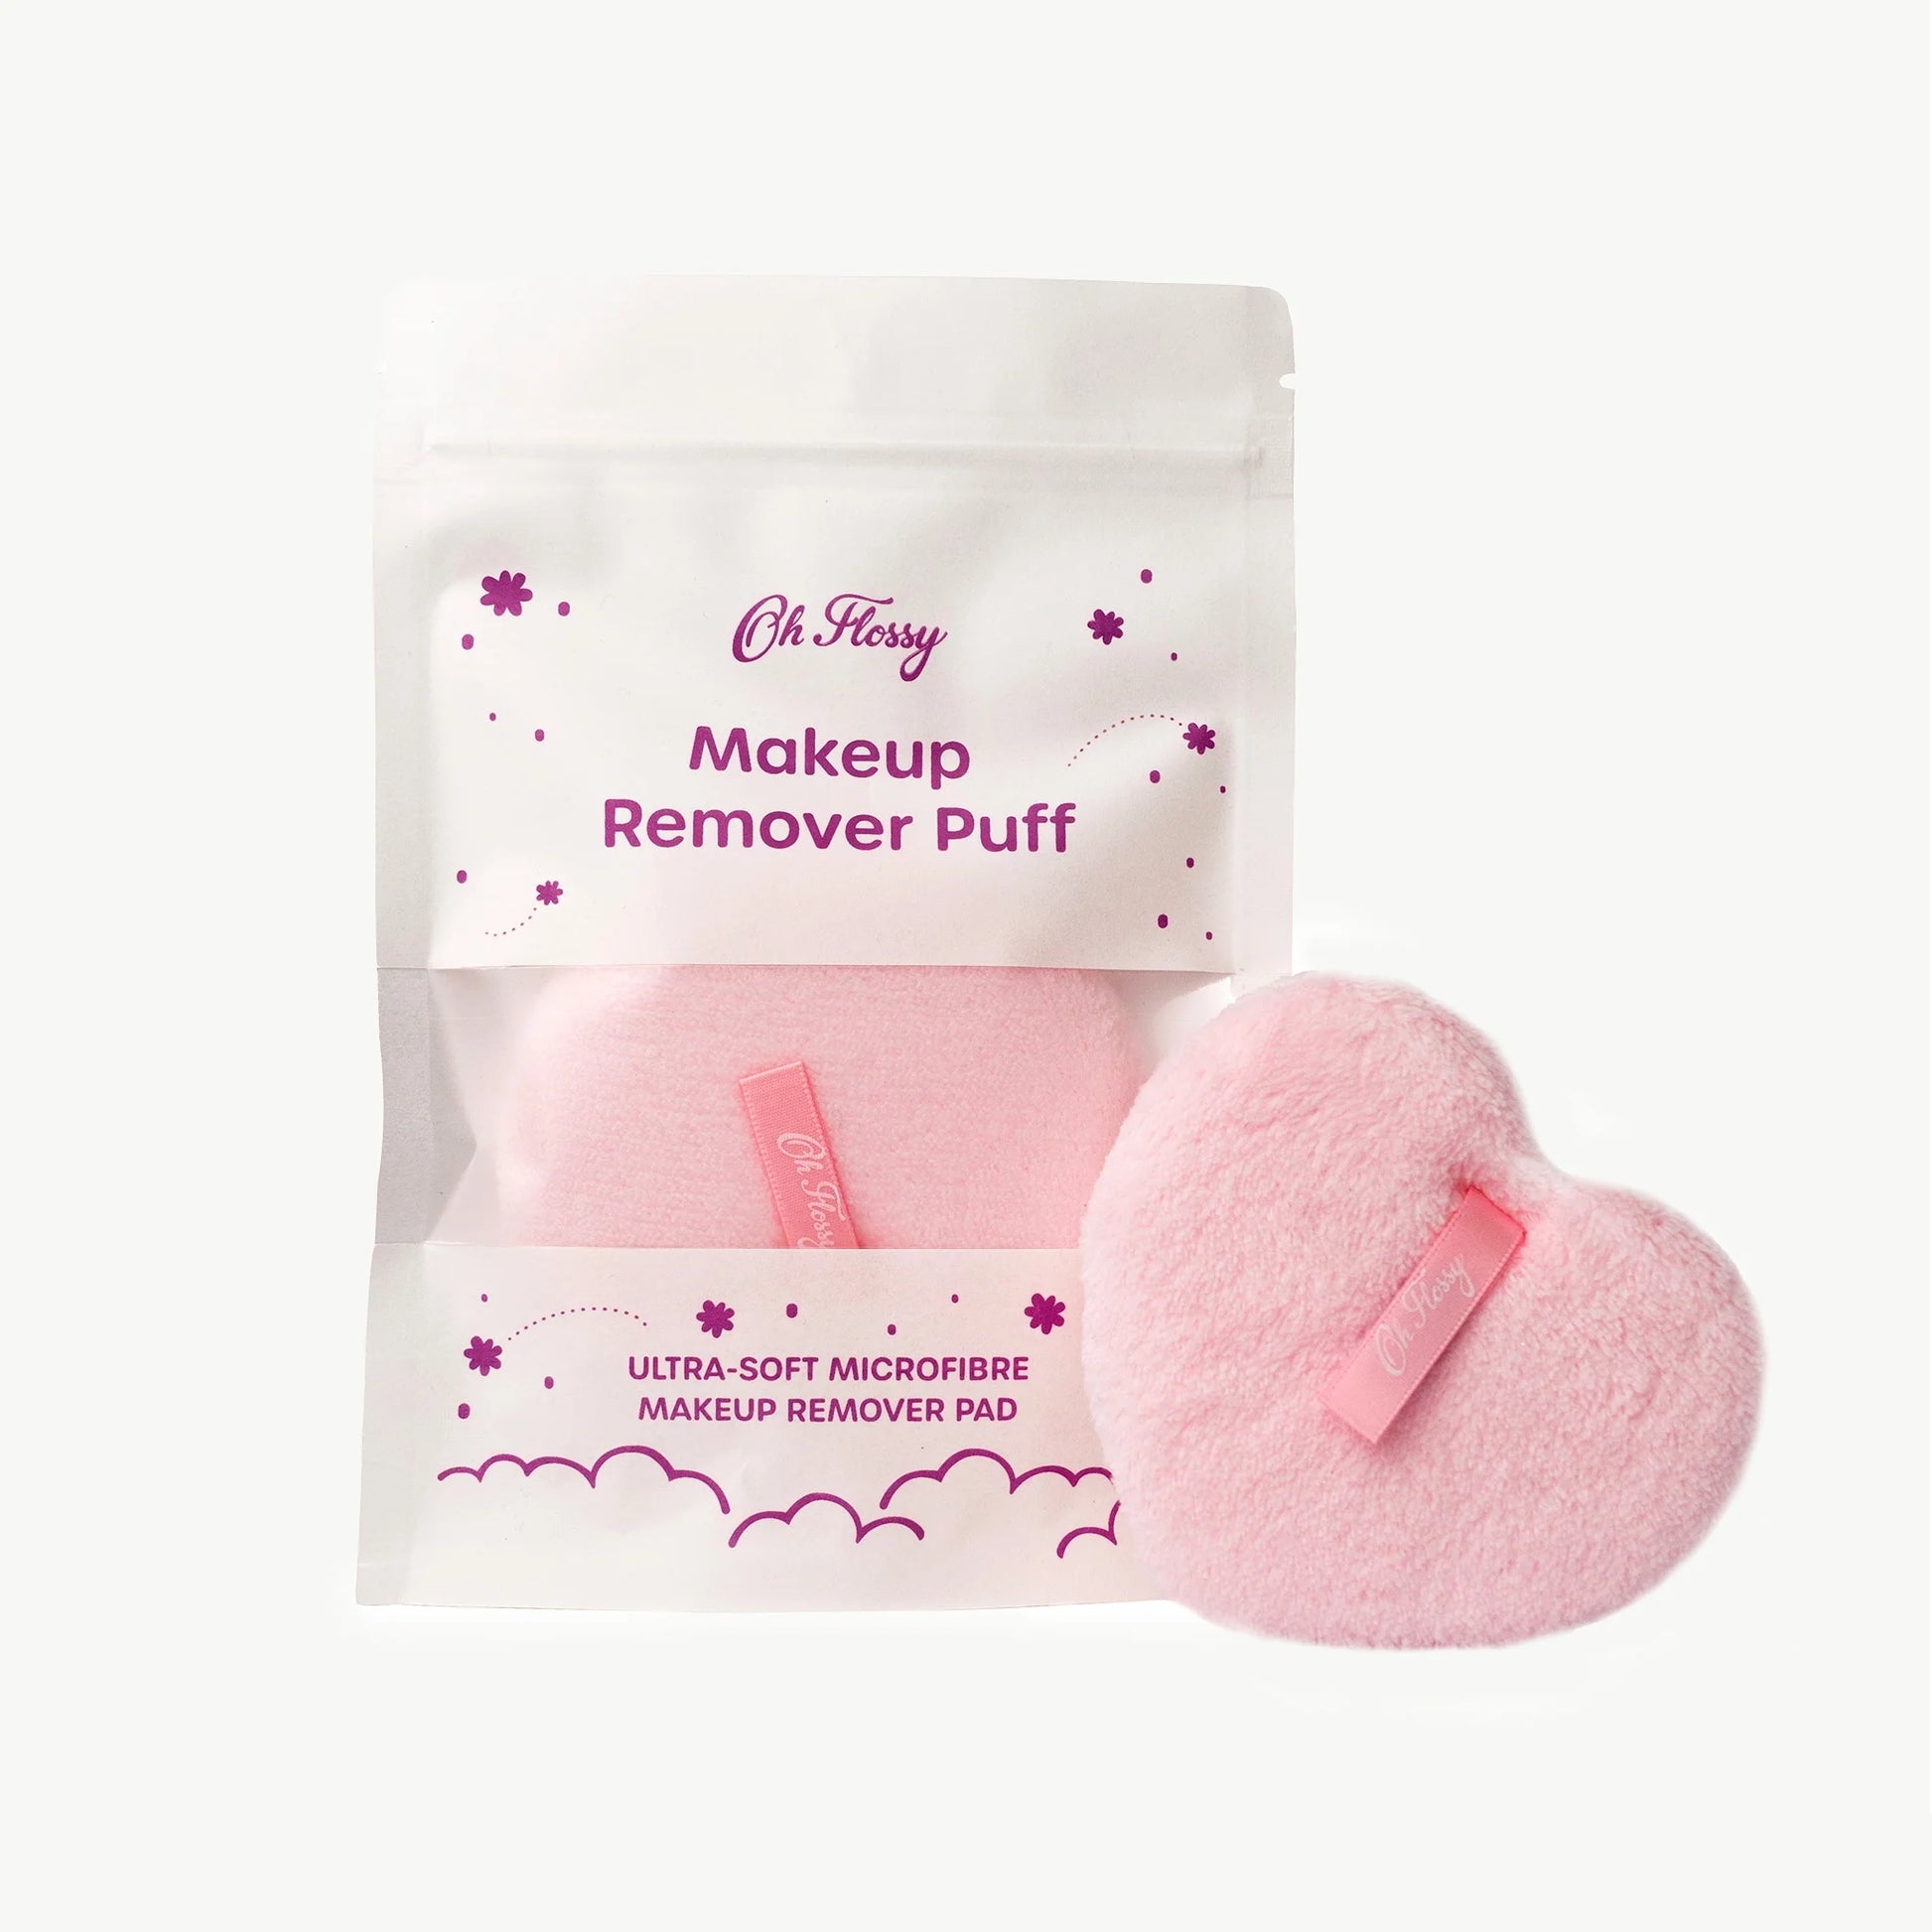 Oh Flossy Makeup Remover Puff - Little Reef and Friends